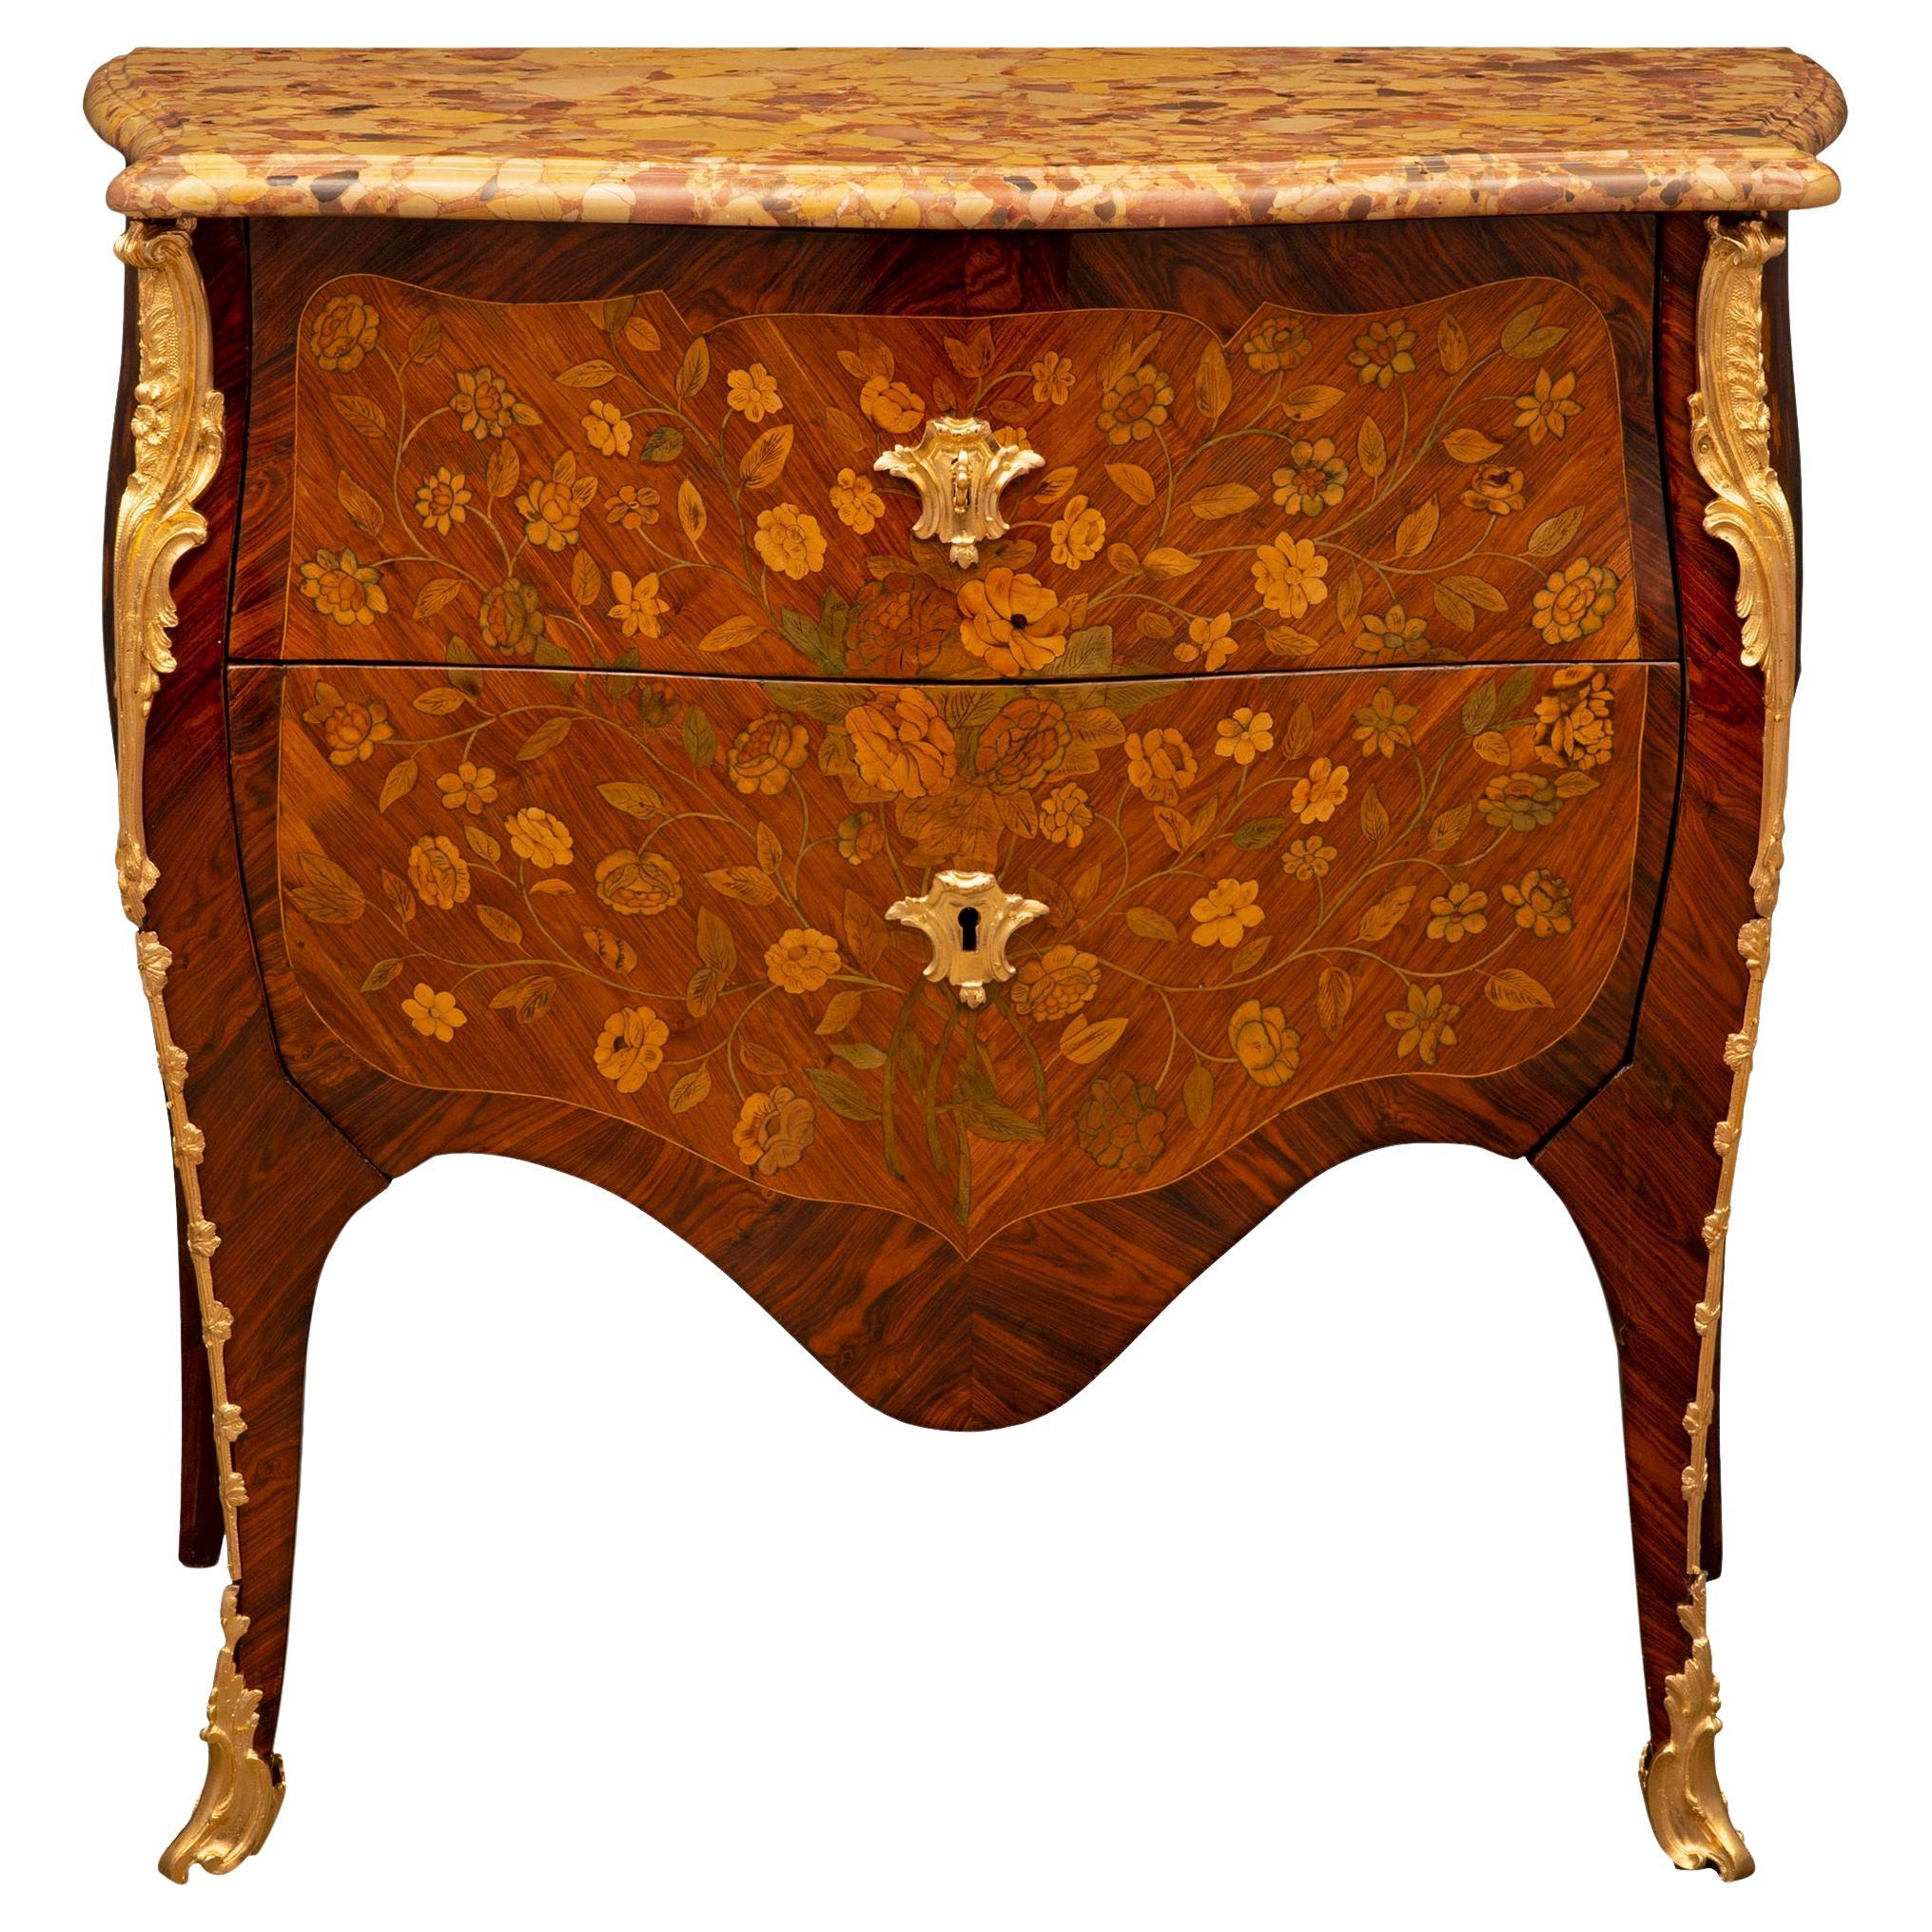 French 18th Century Louis XV Period Rosewood And Brèche D’Alep Marble Commode For Sale